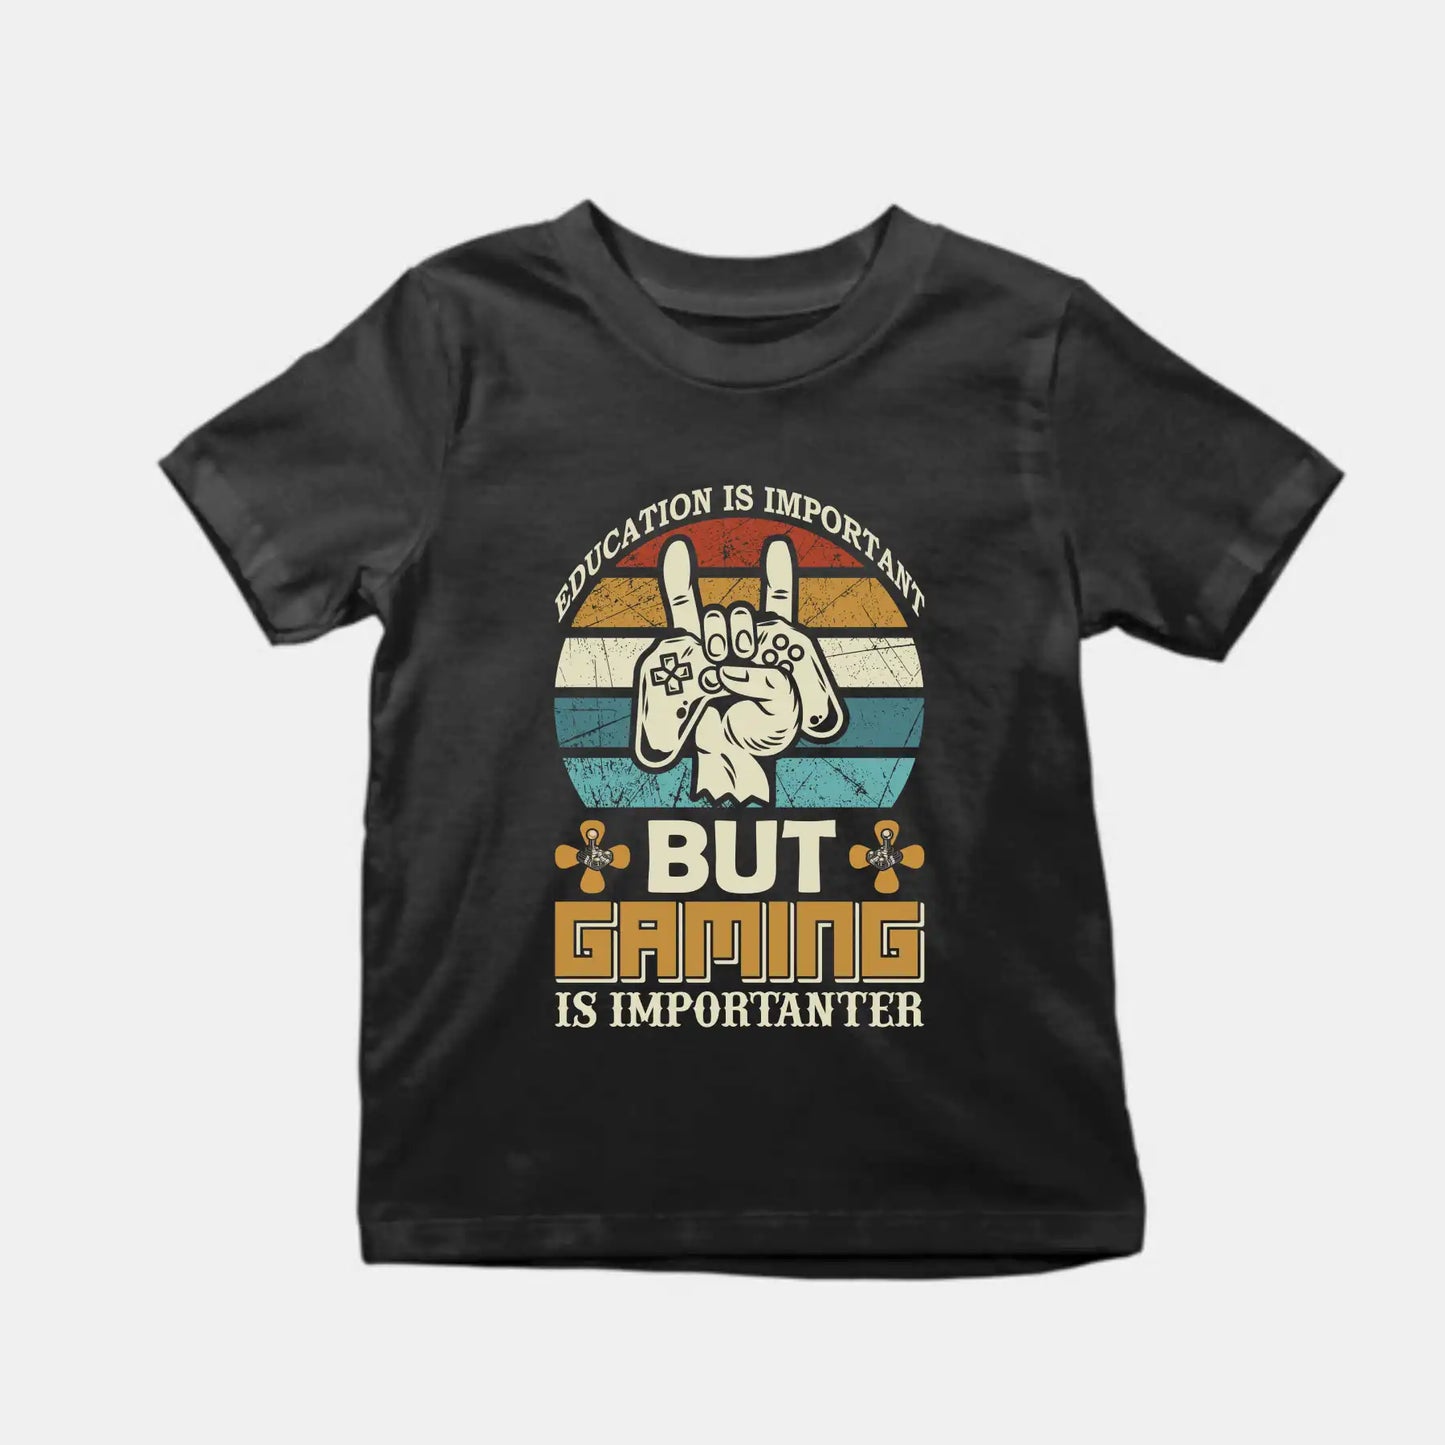 Education is Important but Gaming is Importanter Kids Cotton T-Shirt Black IZZIT APPAREL